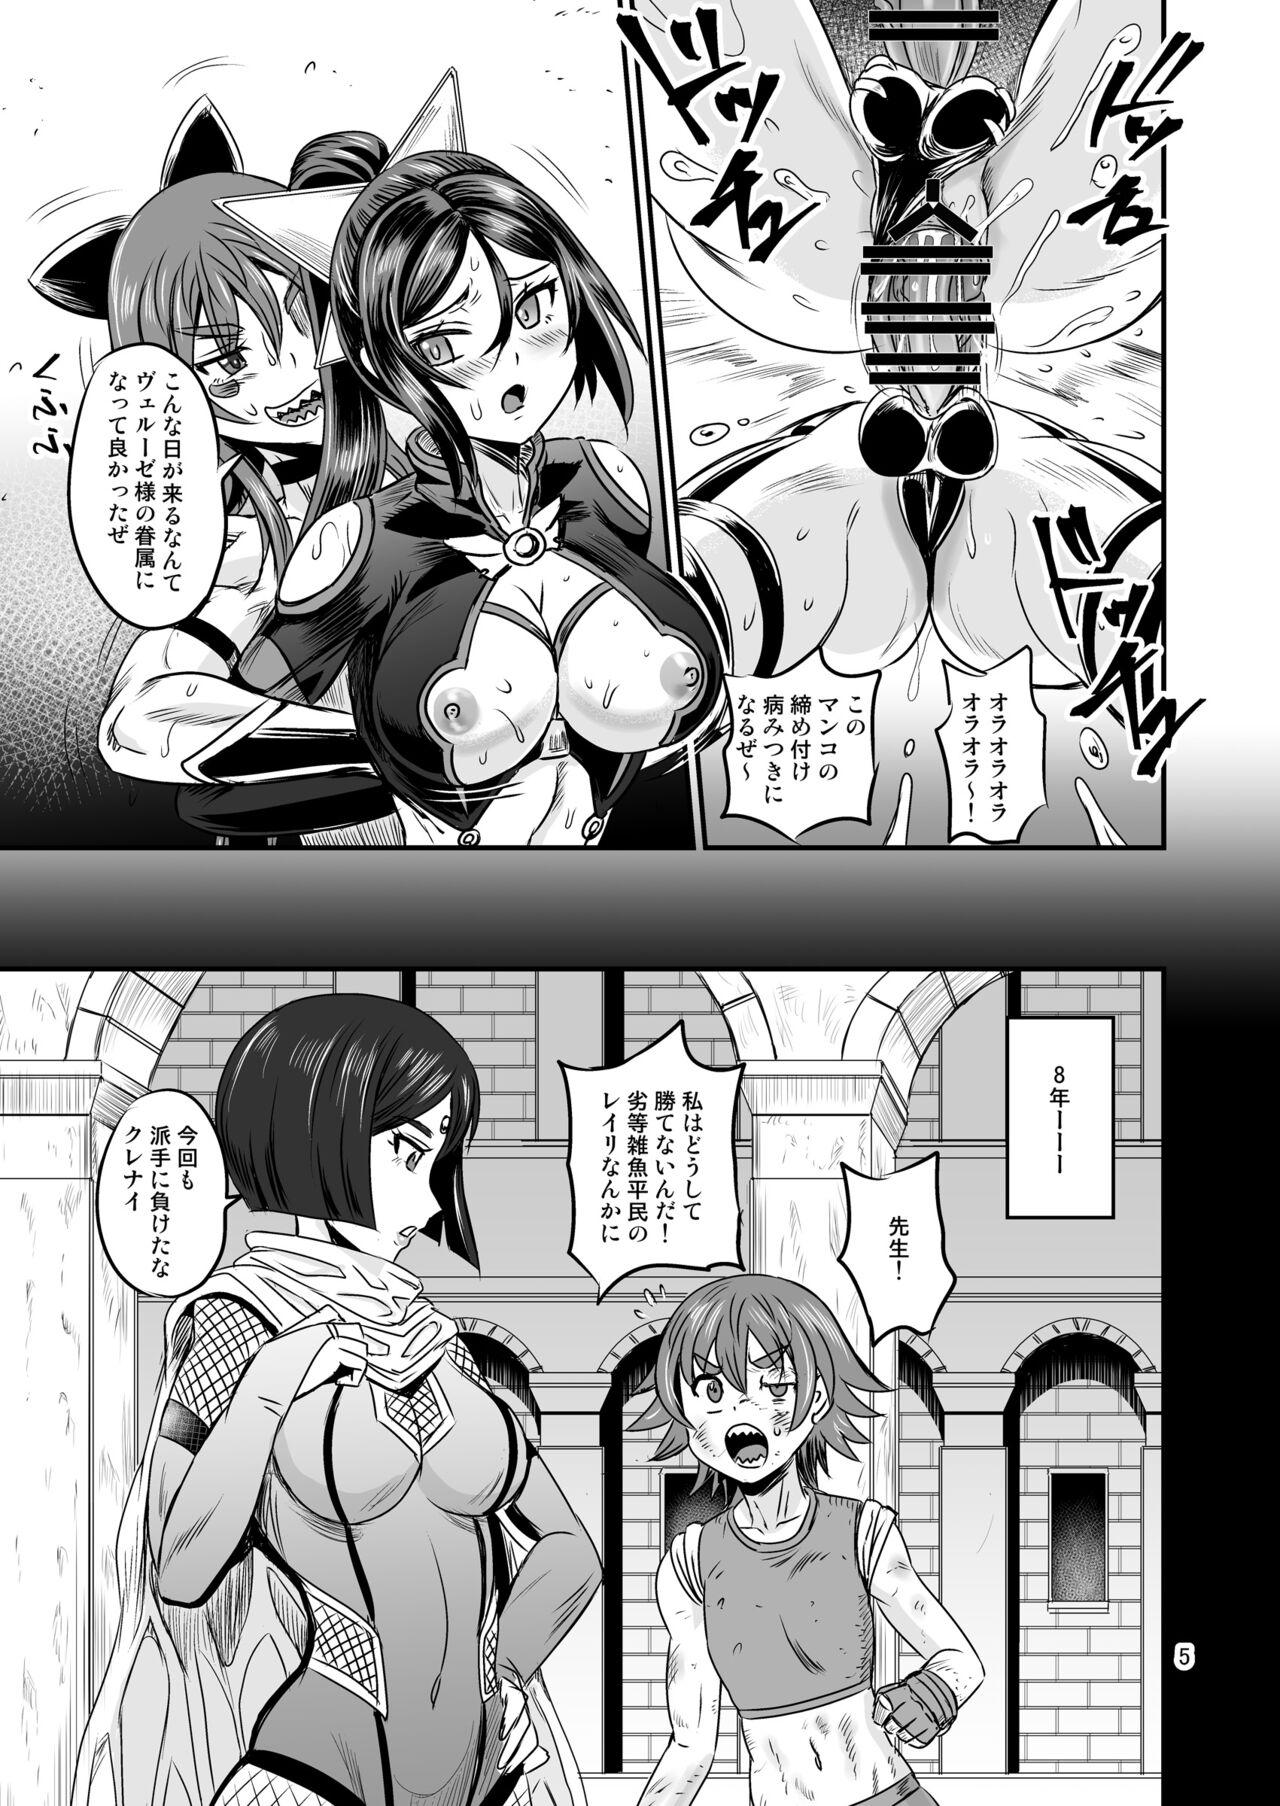 Squirt Mahoushoujyo Rensei System EPISODE 06 - Original Clothed - Page 5